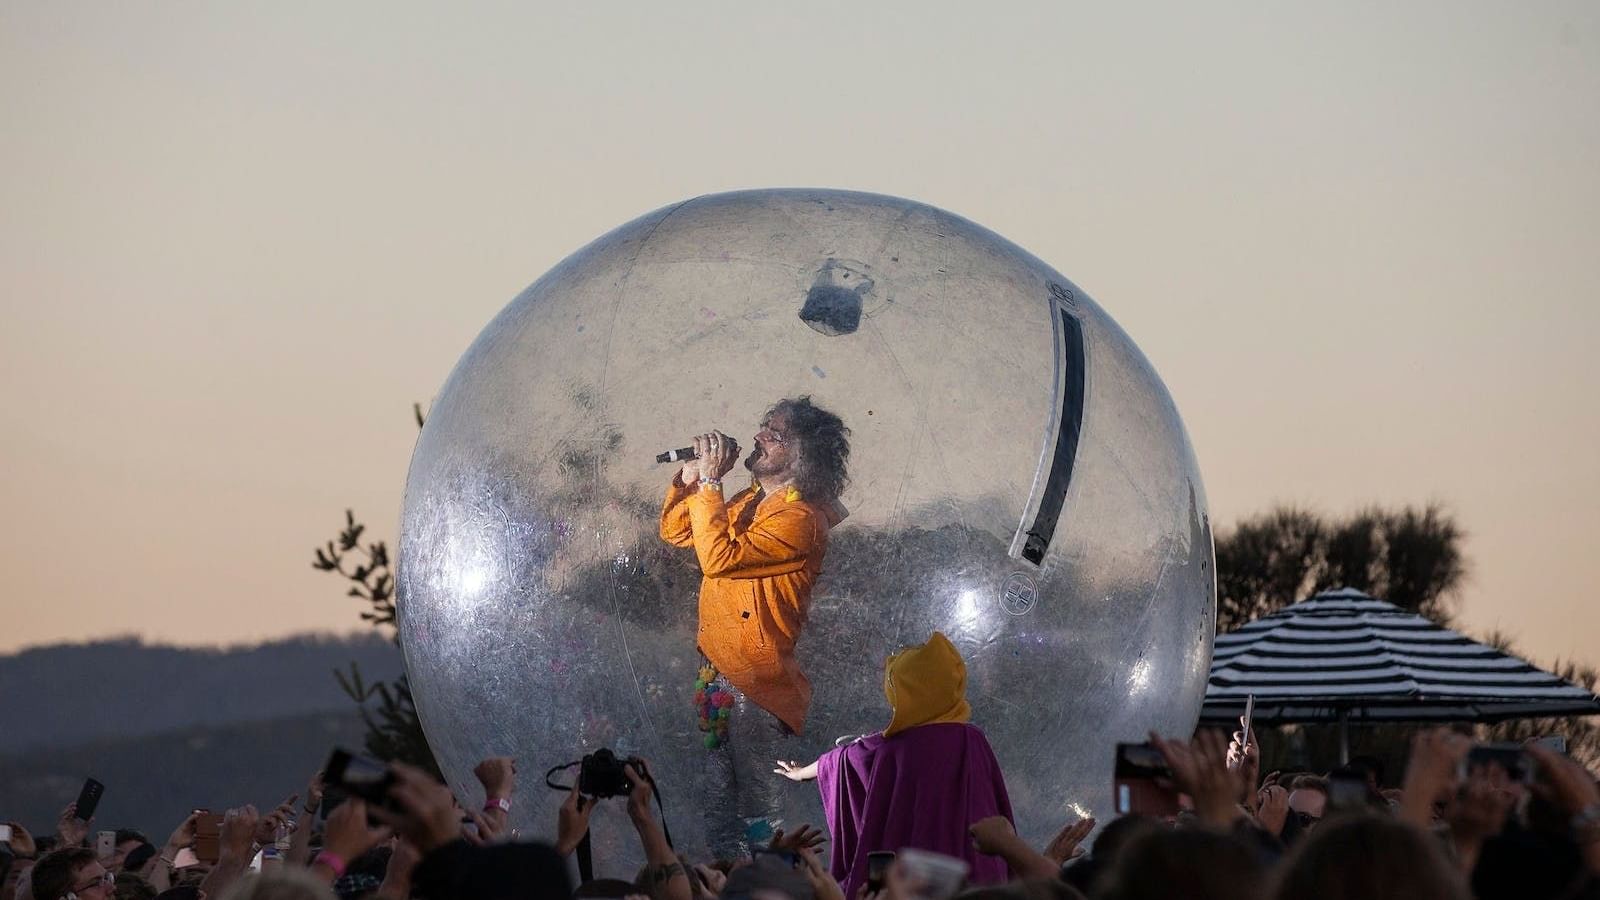 Singer performing amidst a crowd on a bubble at Mona Foma festival near Hotel Grand Chancellor Hobart